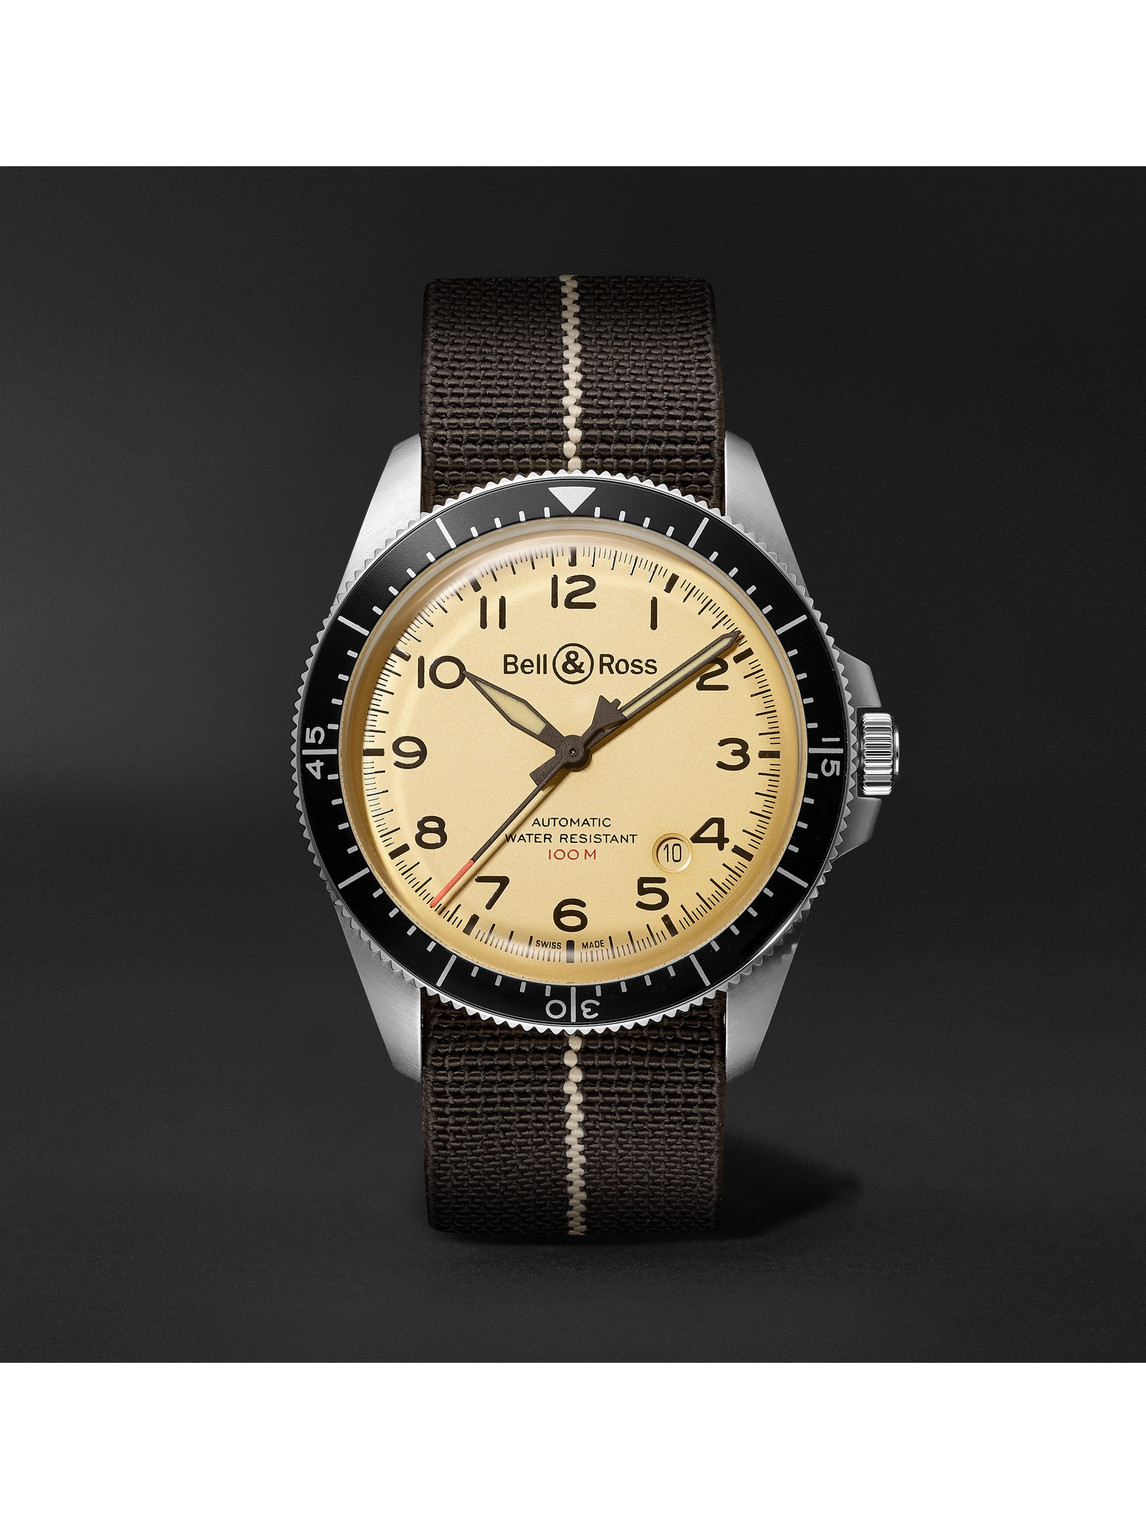 BR V2-92 Limited Edition Military Beige Automatic 41mm Stainless Steel and Canvas Watch, Ref. No. BRV292-BEI-ST/SF